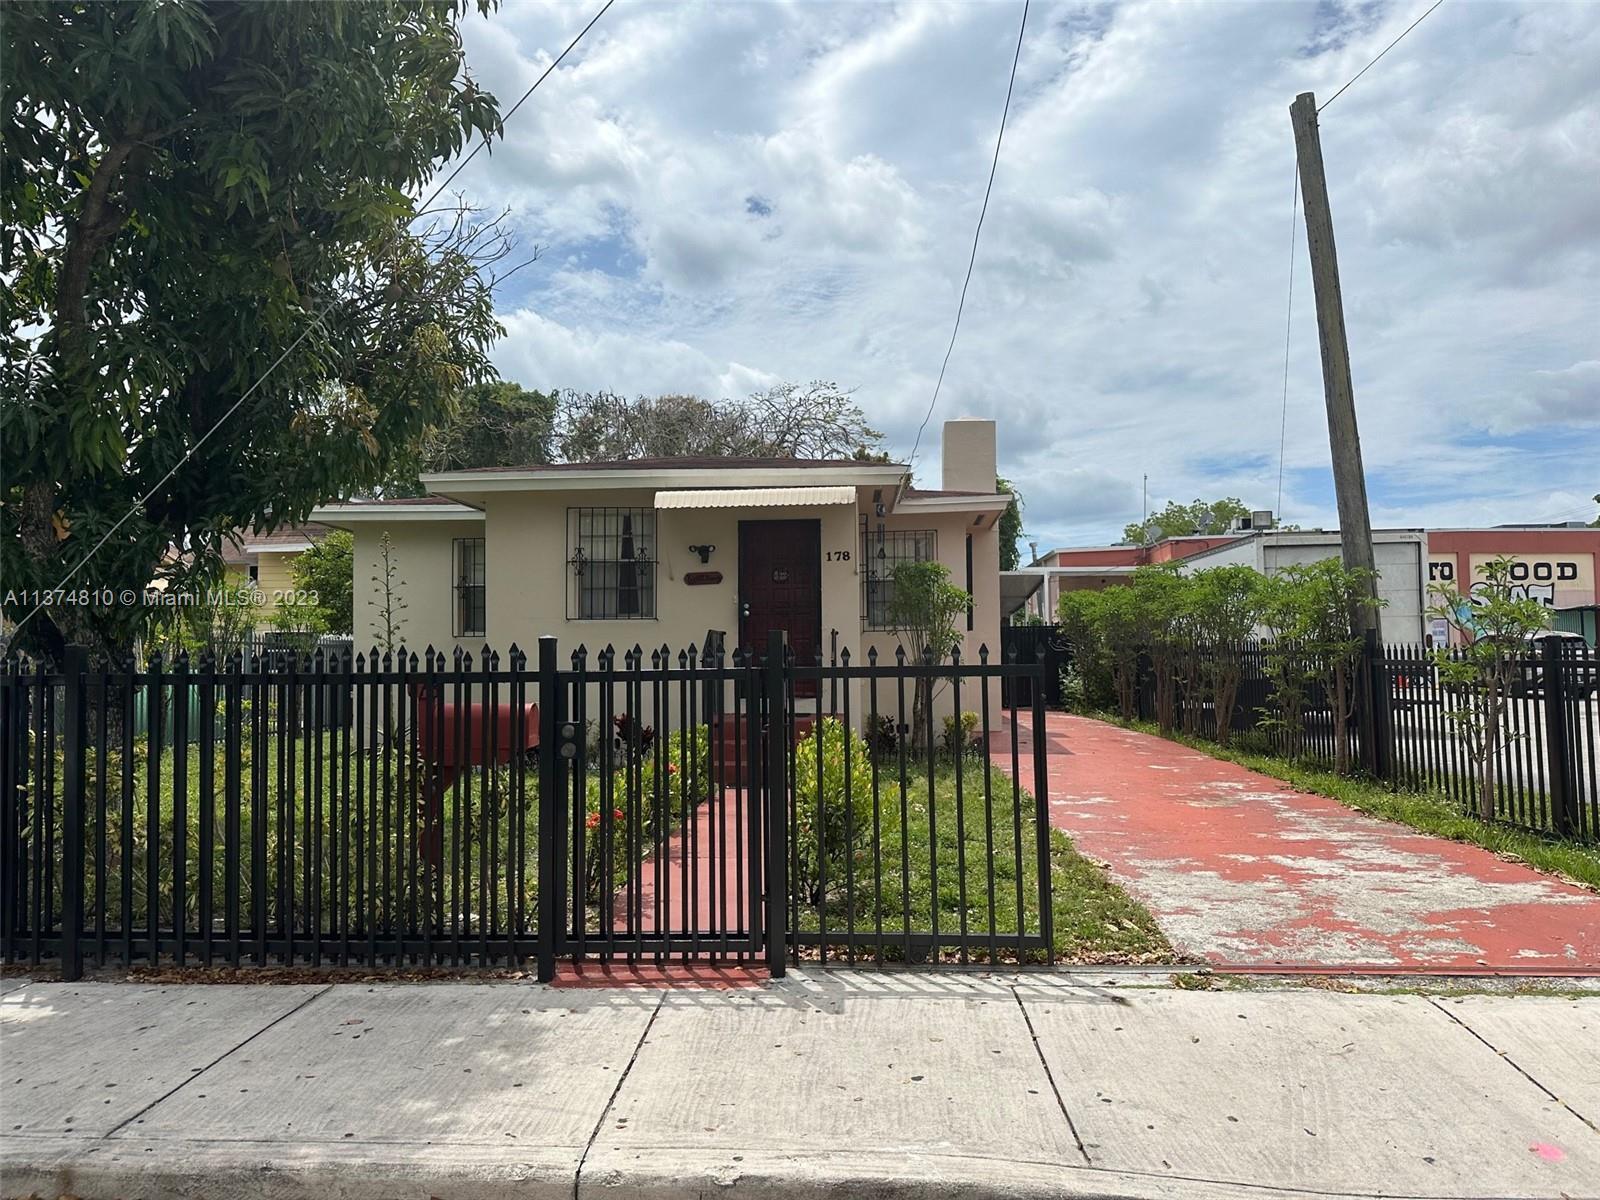 Photo of 178 NW 33rd St in Miami, FL